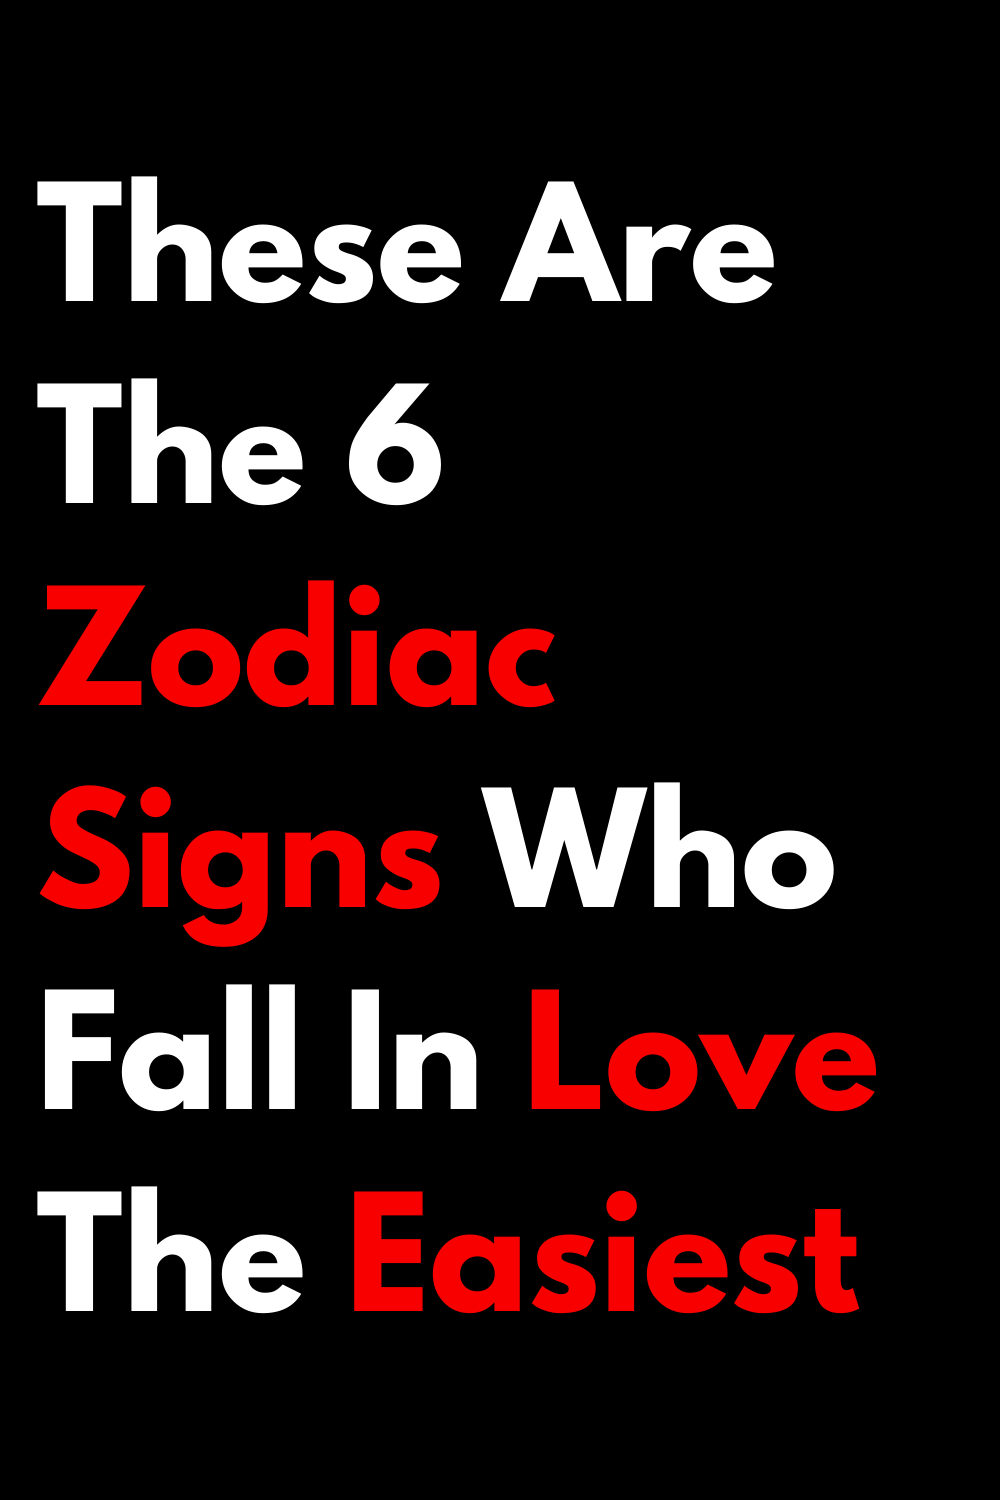 These Are The 6 Zodiac Signs Who Fall In Love The Easiest